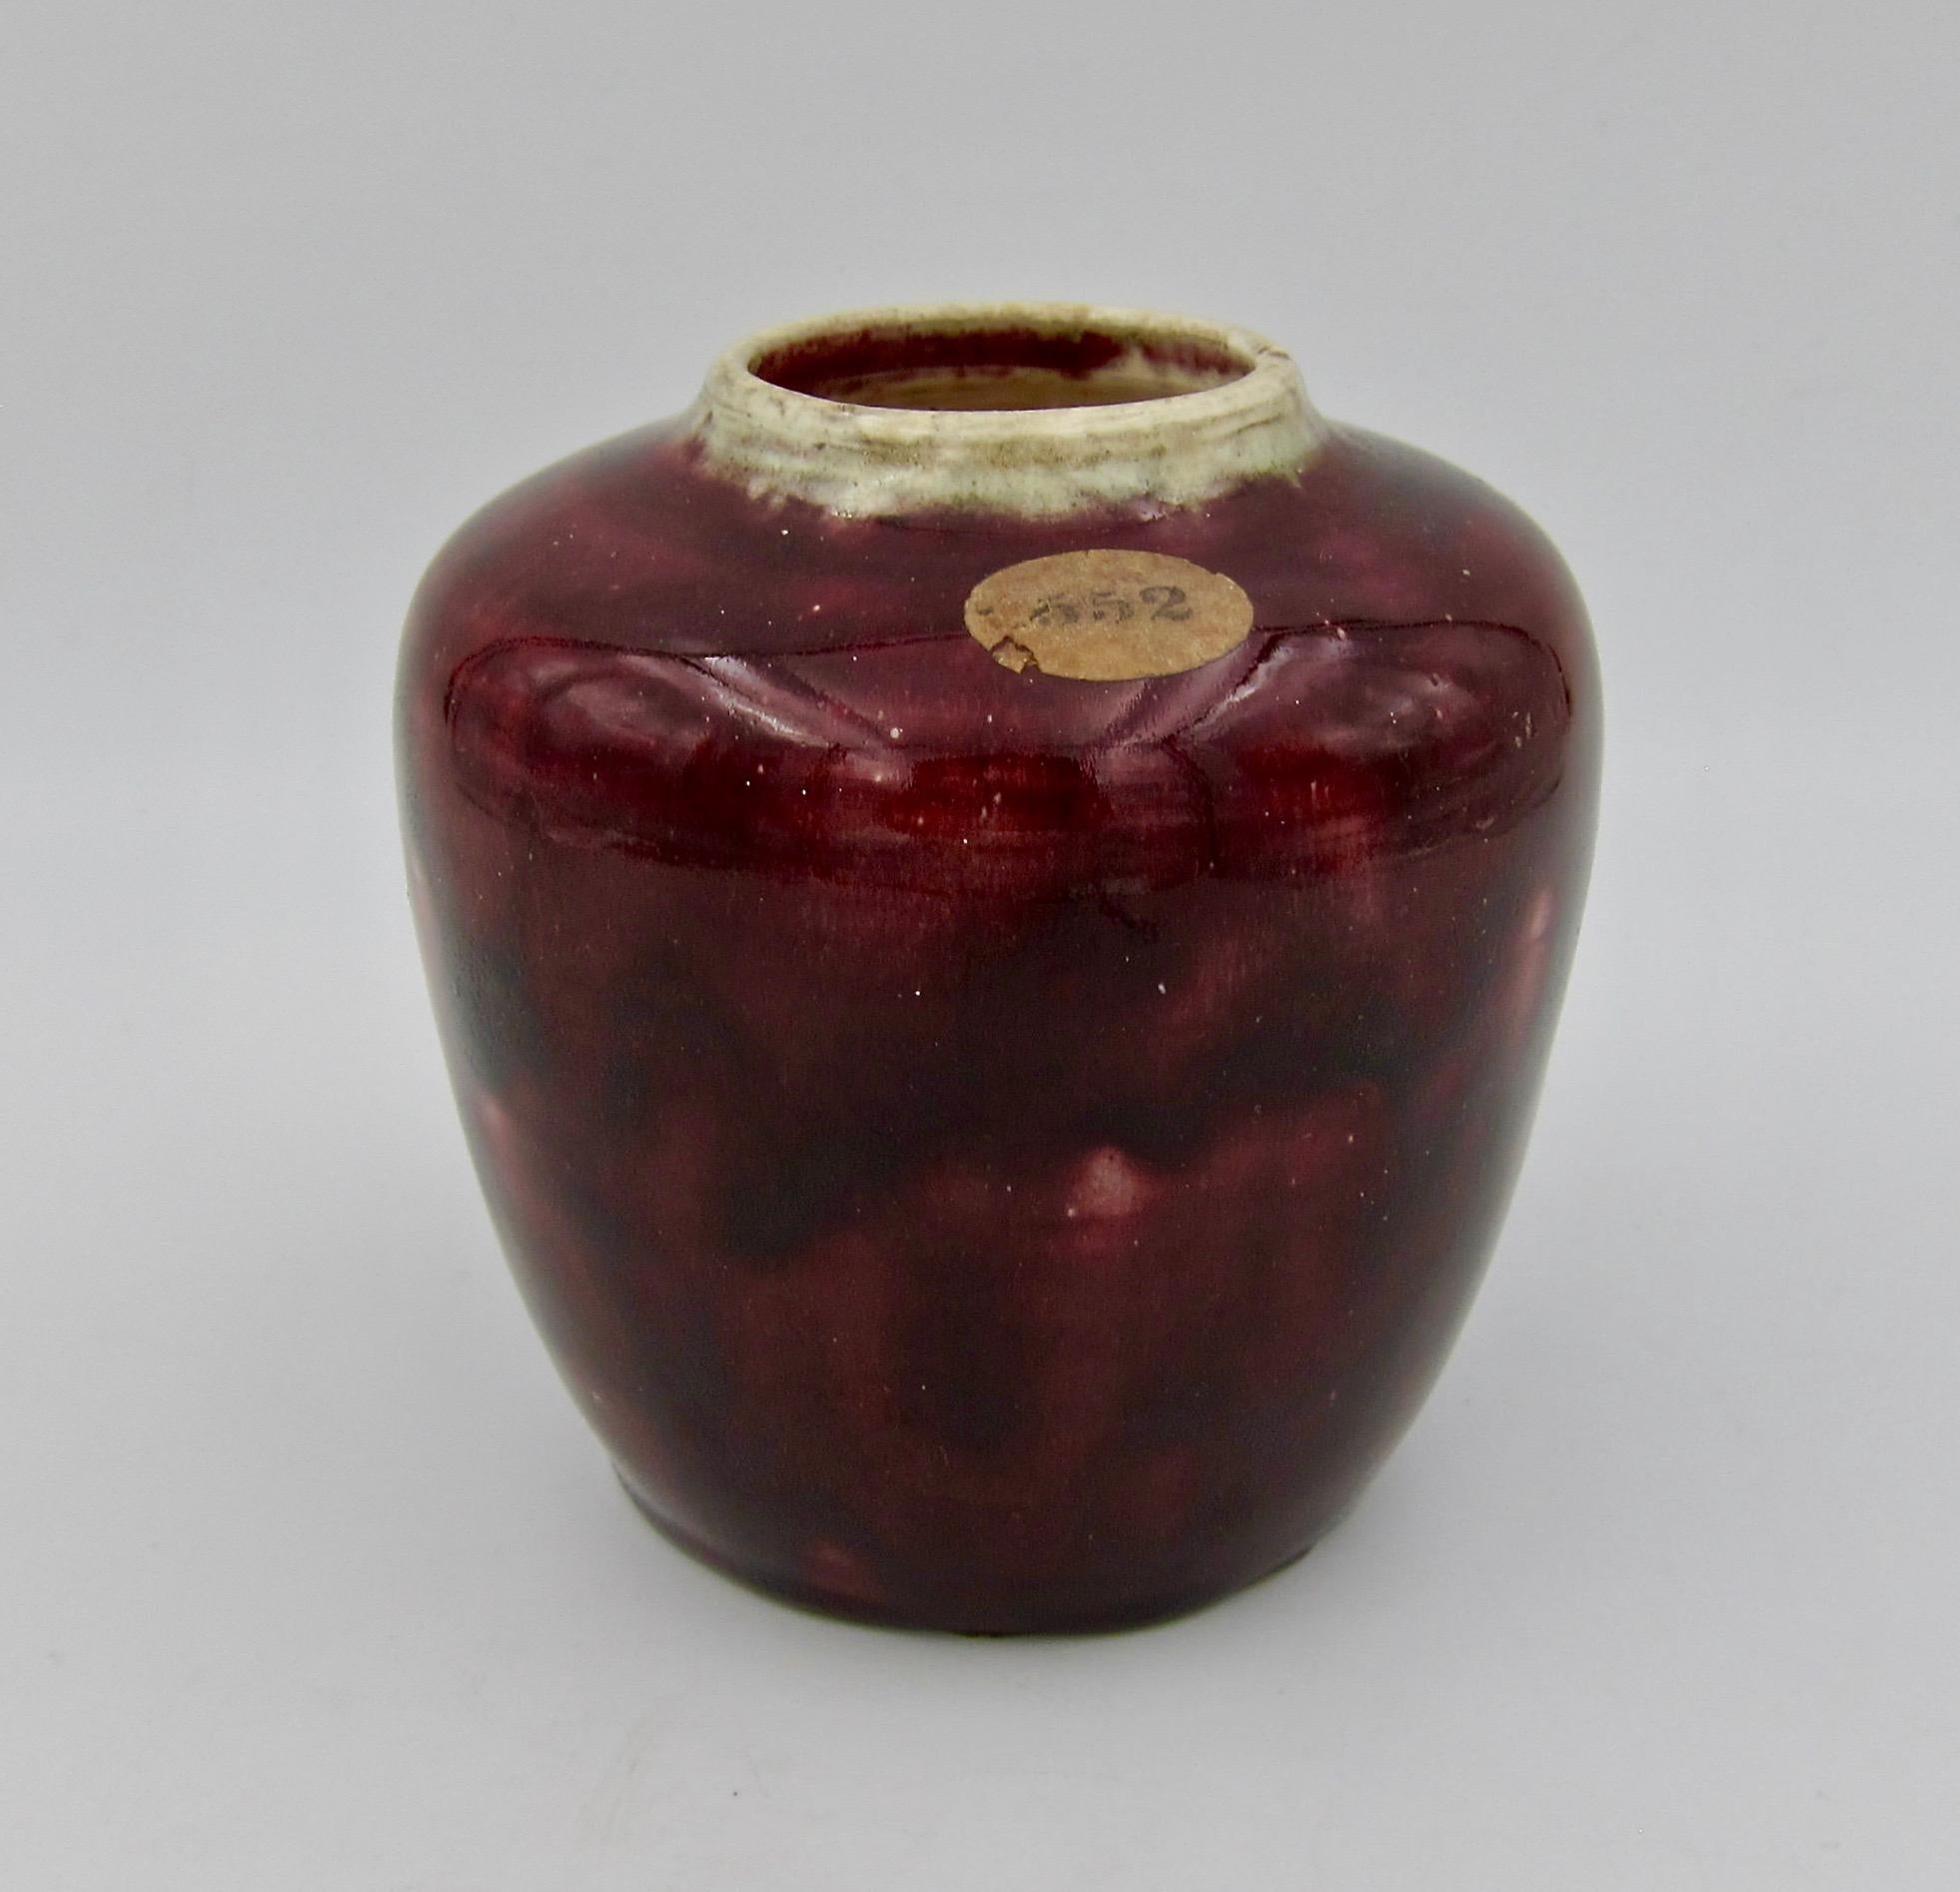 An early 20th century Arts & Crafts vase by American painter, engraver, sculptor, and ceramicist, Charles Volkmar (1841-1914). This diminutive art pottery vessel was hand-raised and decorated with a dark, mottled coppery-red glaze and a contrasting